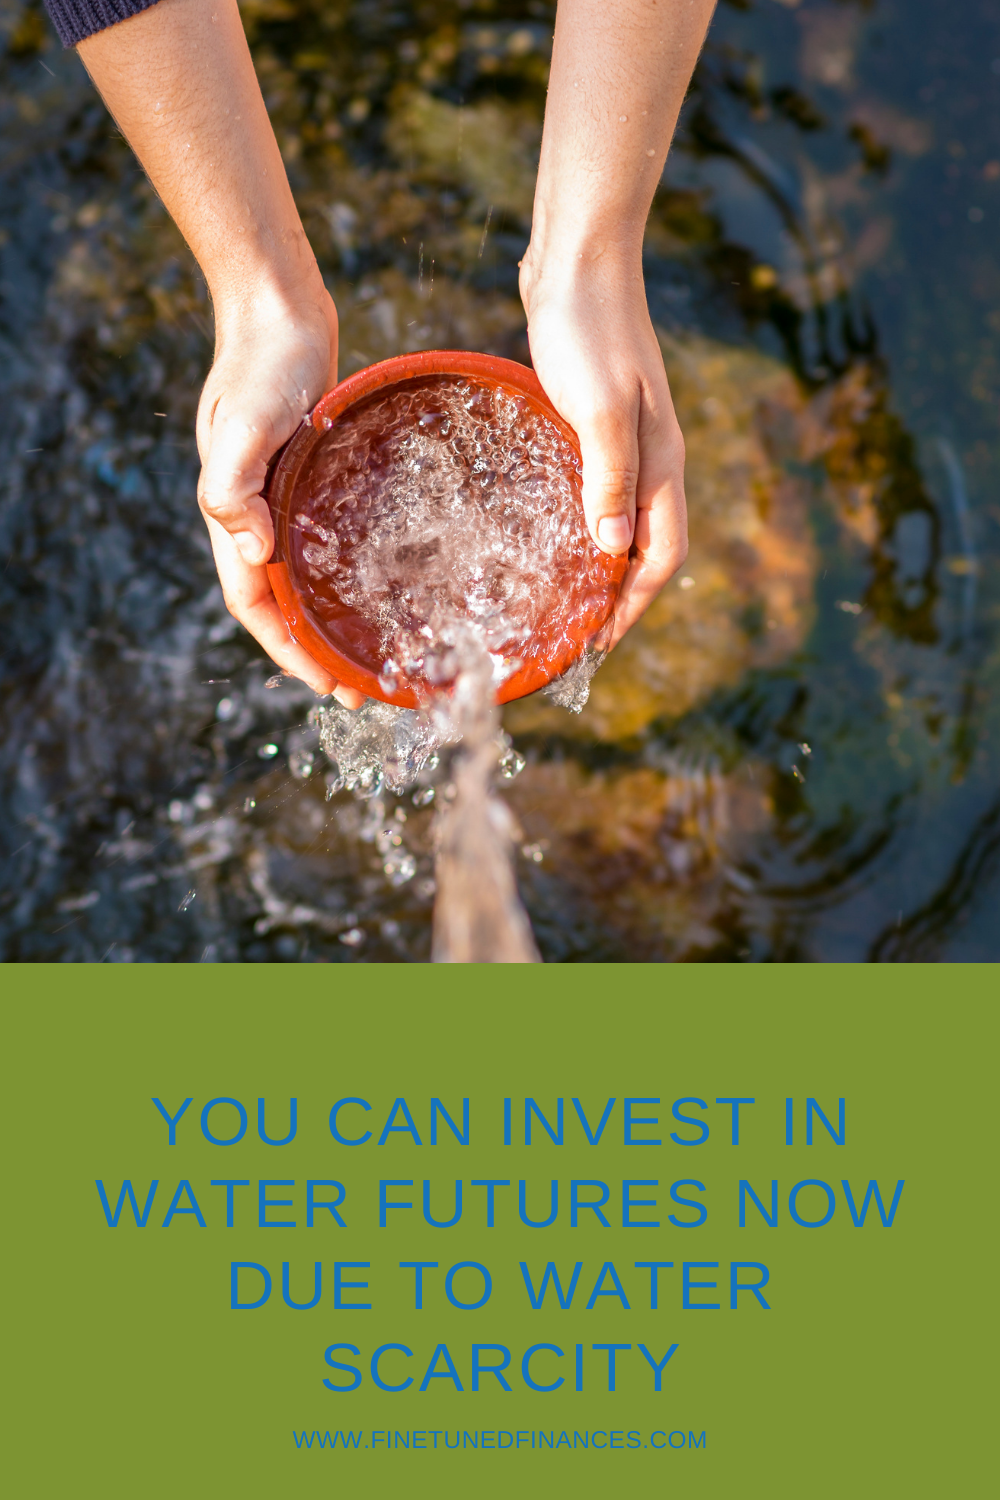 You Can Invest in Water Futures Now due to Water Scarcity